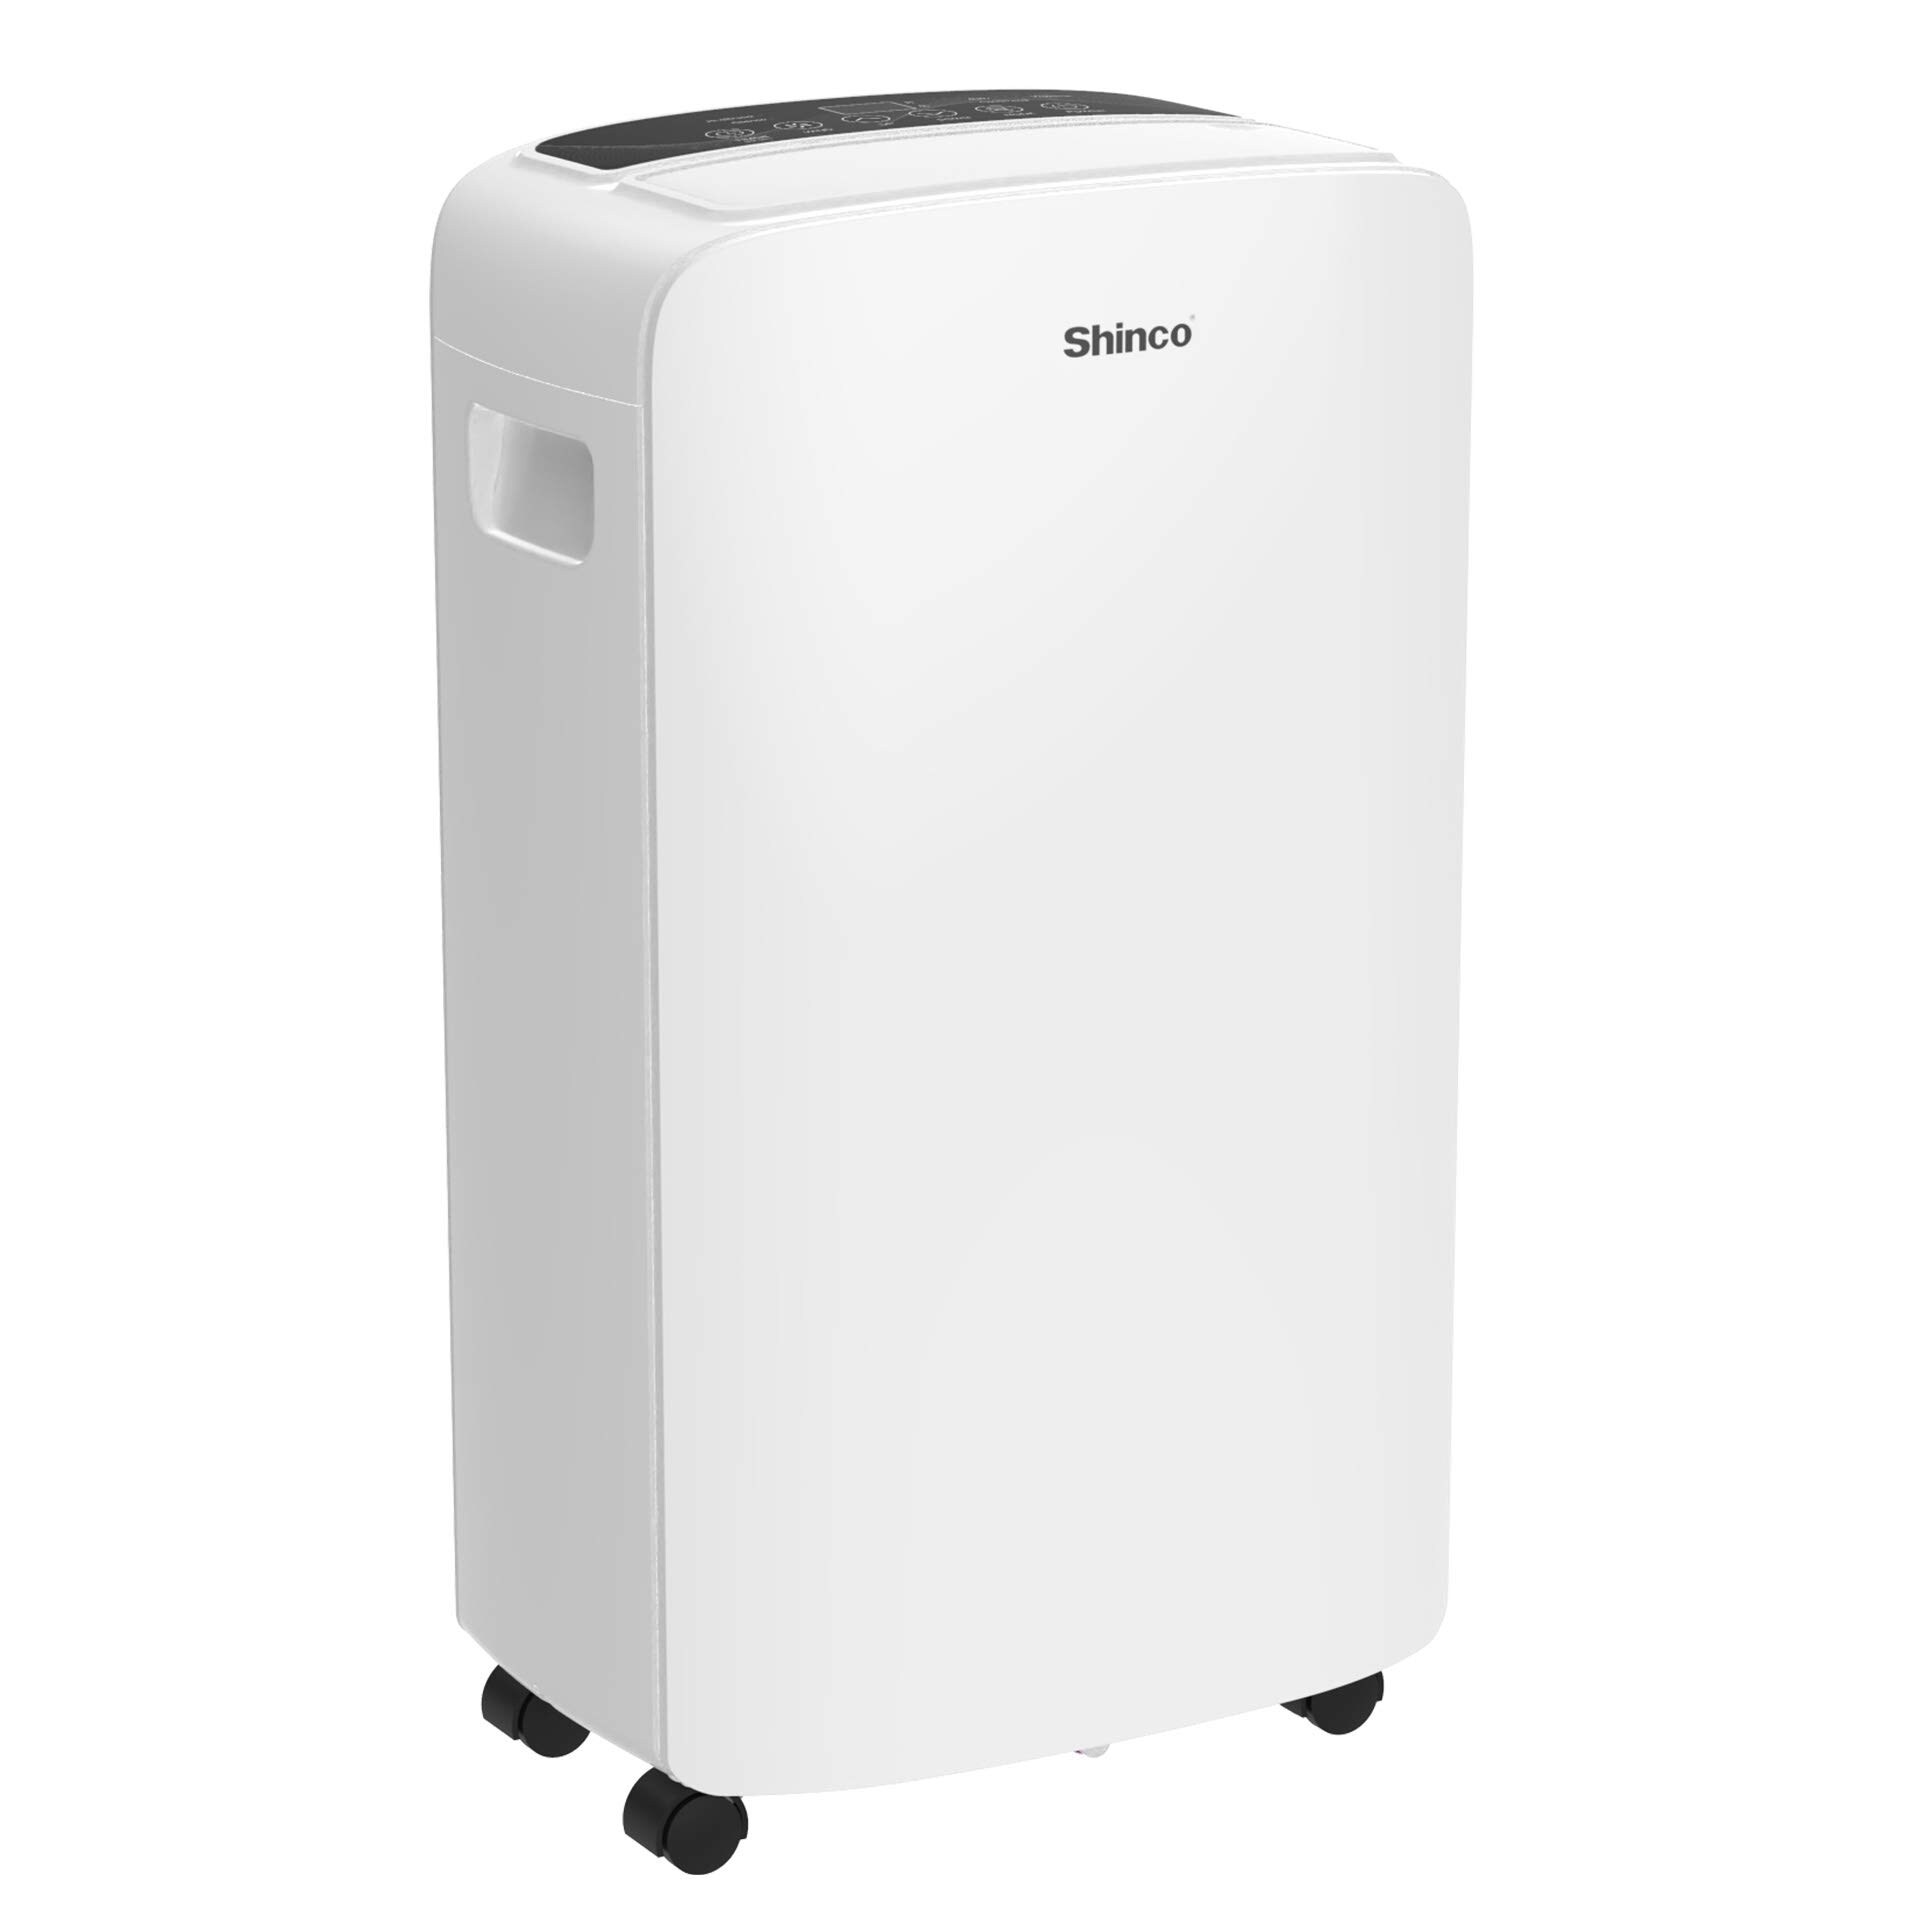  BLACK+DECKER 1500 Sq. Ft. Dehumidifier for Medium to Large  Spaces and Basements, Energy Star Certified, Portable, BDT20WTB , White